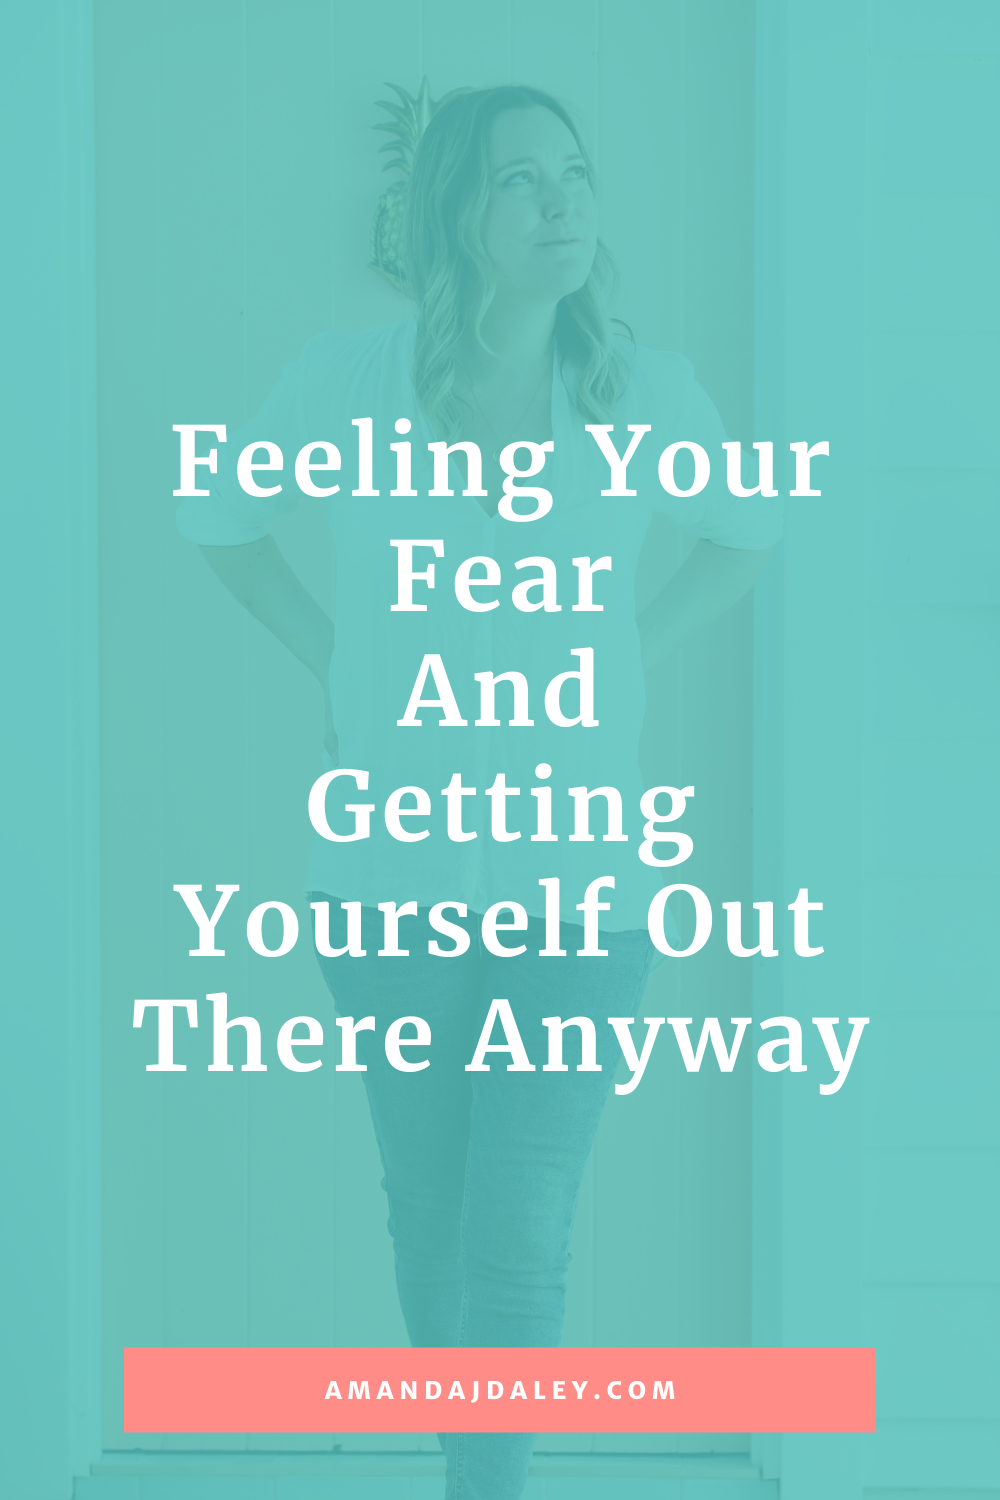 feeling-your-fear-and-getting-yourself-out-there-anyway-amanda-jane-daley